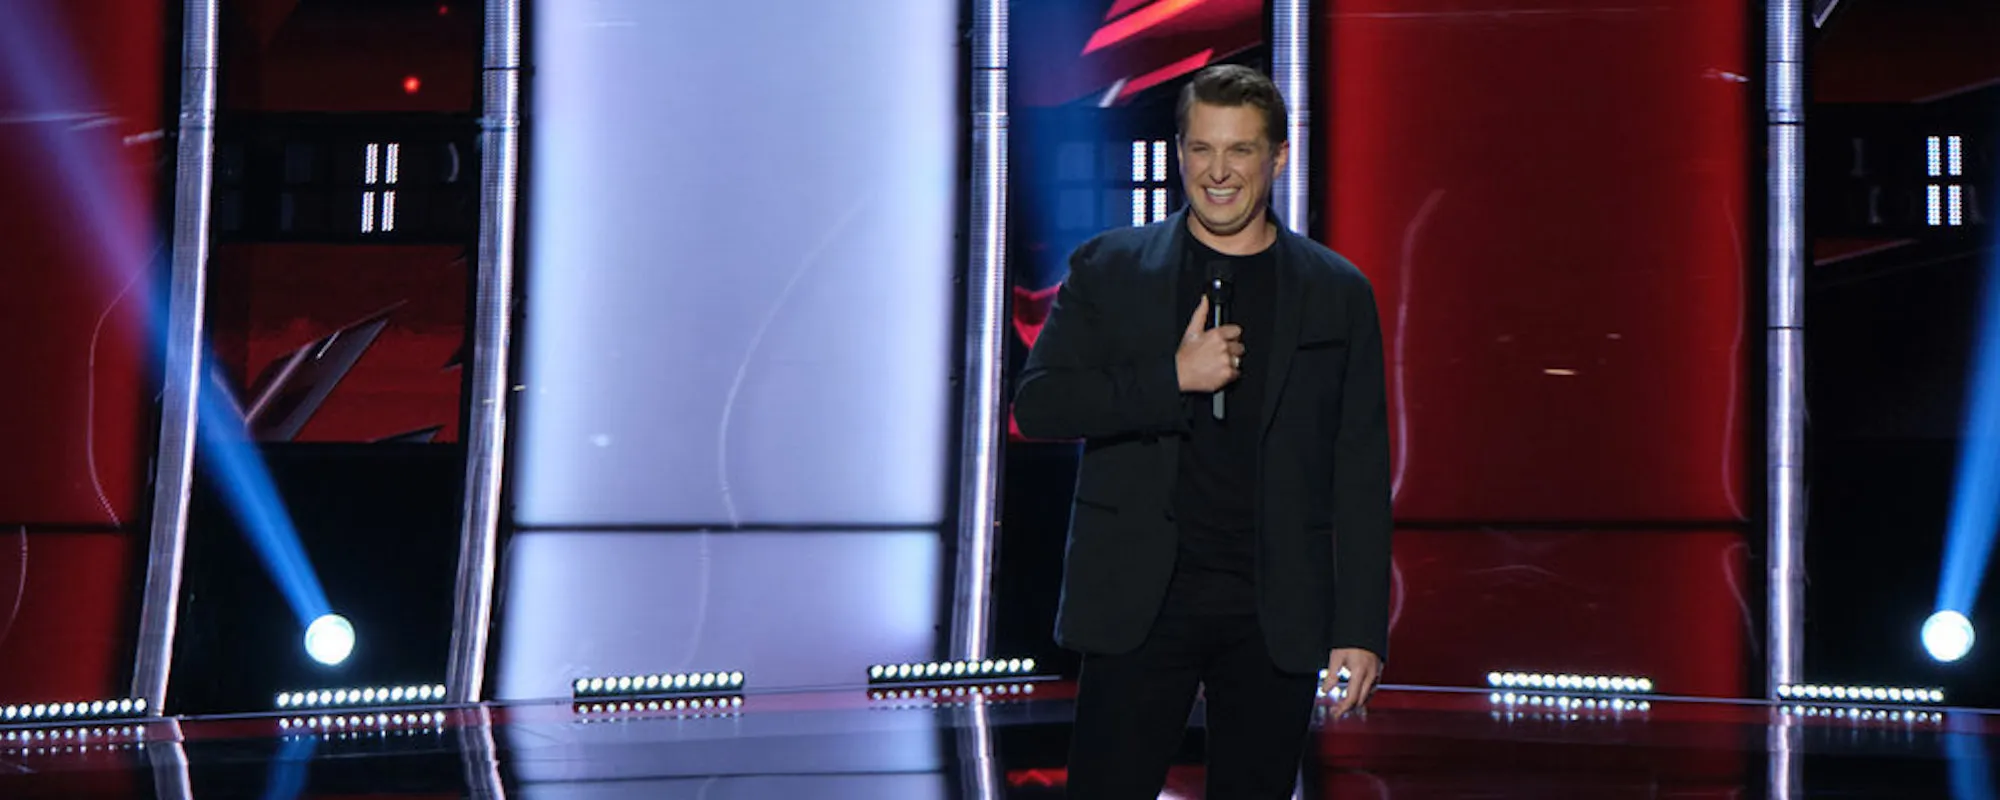 Steven McMorran, Songwriter for Celine Dion, Tim McGraw, Jimmie Allen and More, Gets Spot on ‘The Voice’